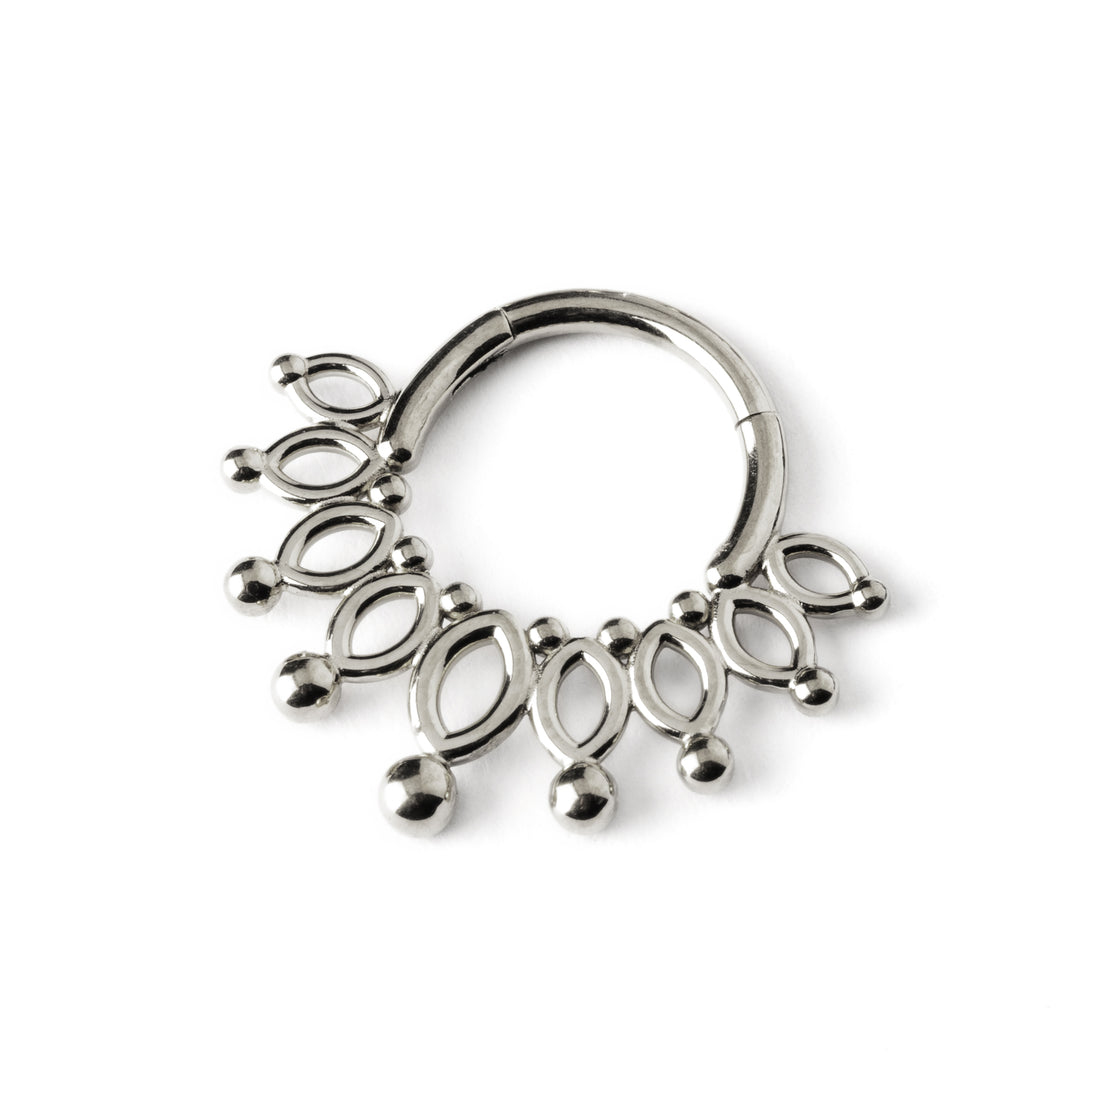 Anastasia surgical steel flower petals septum clicker right side view